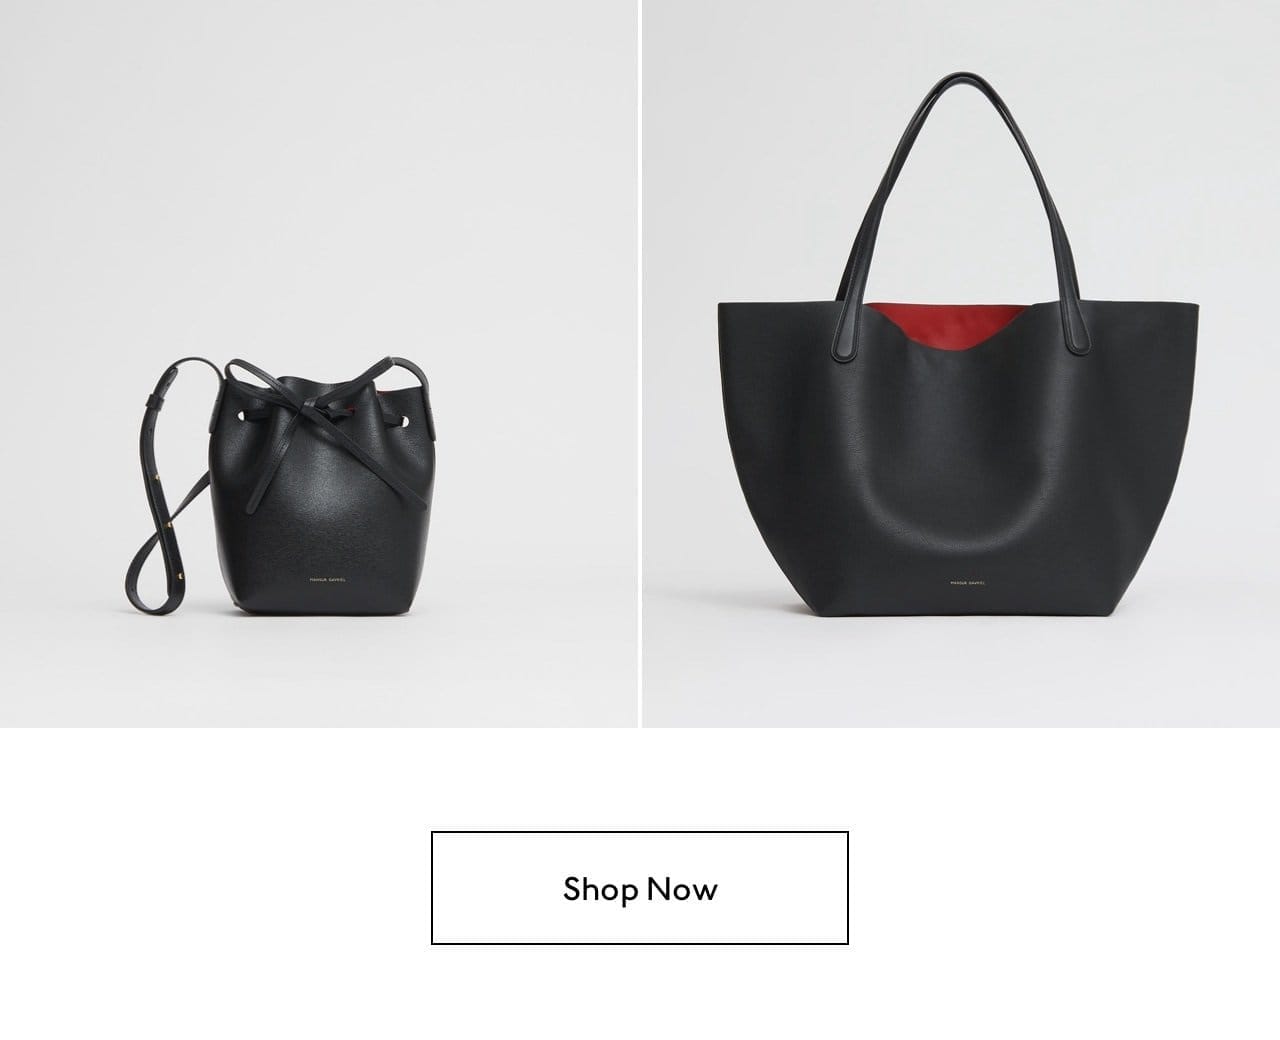 Shop the Mini Mini Bucket in Black Saffiano and the Everyday Soft Tote now.